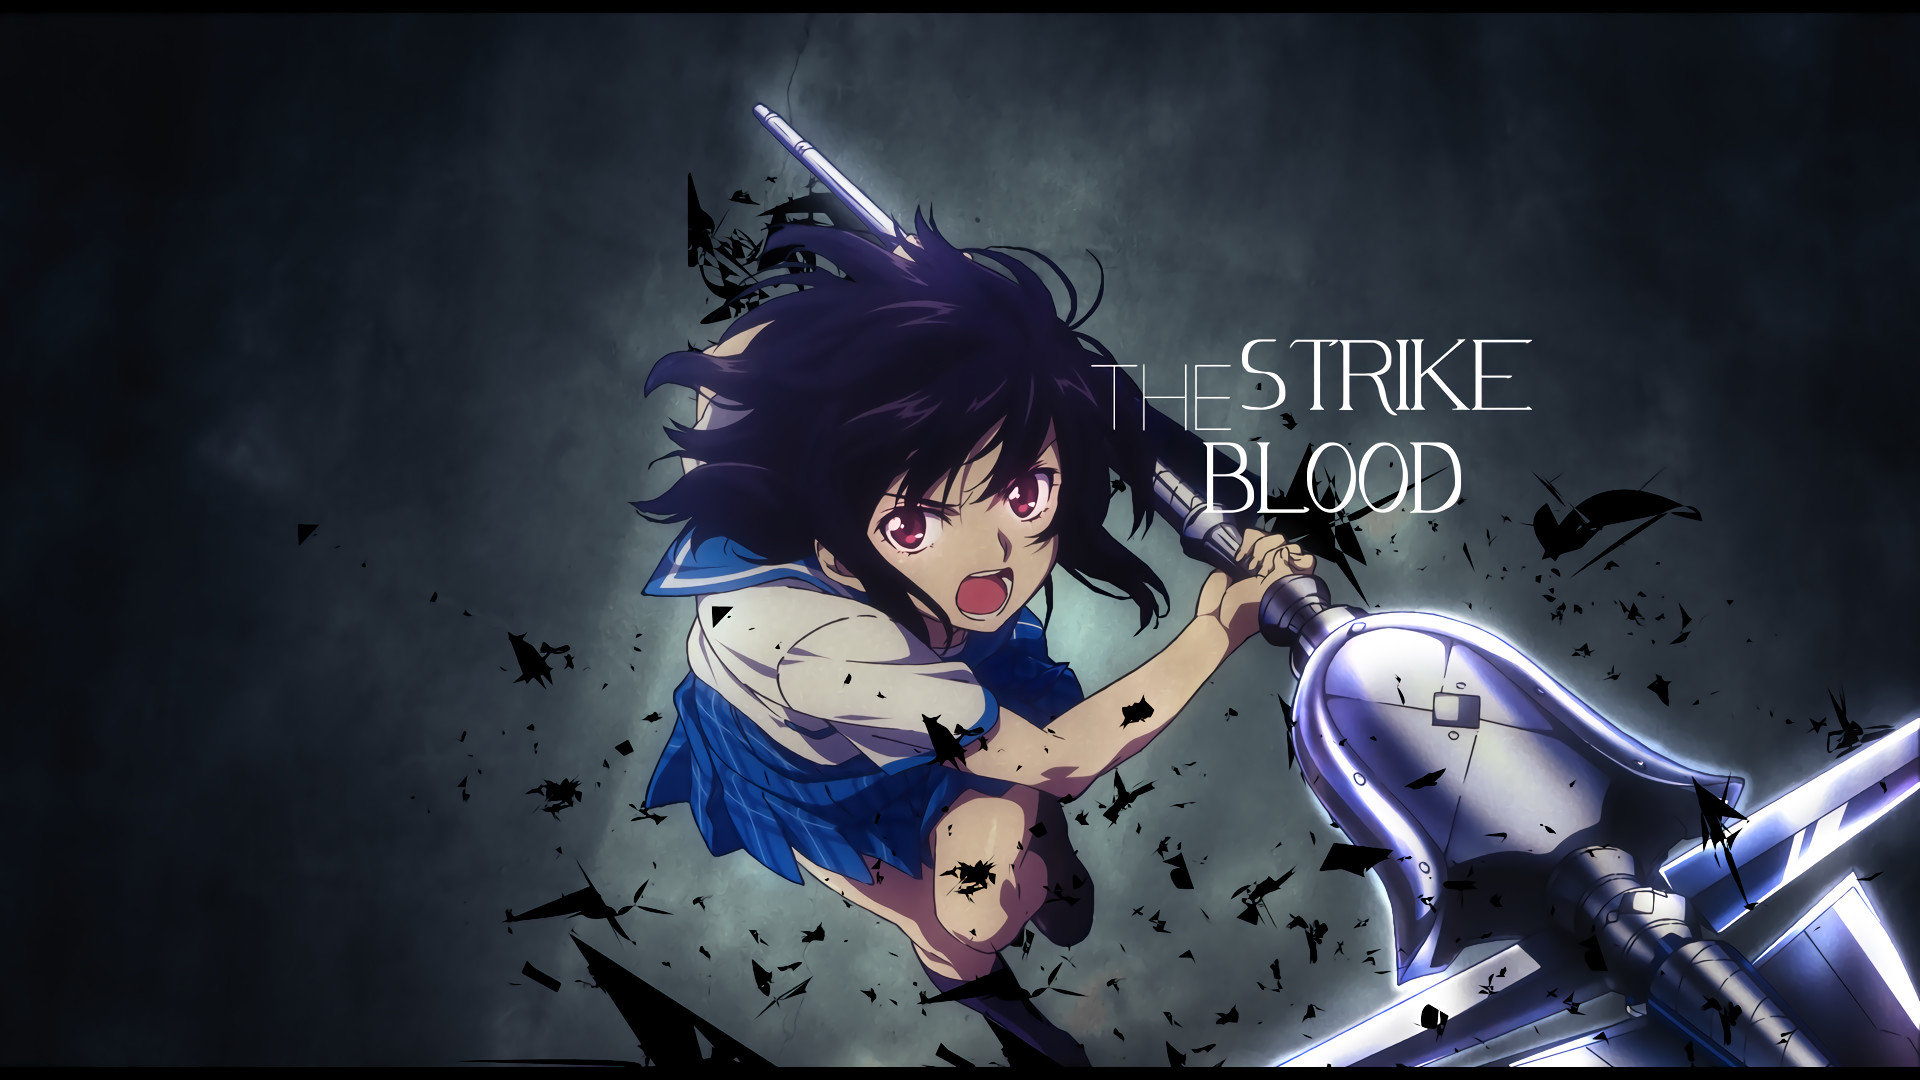 Download hd 1920x1080 Strike The Blood PC wallpaper ID:194434 for free